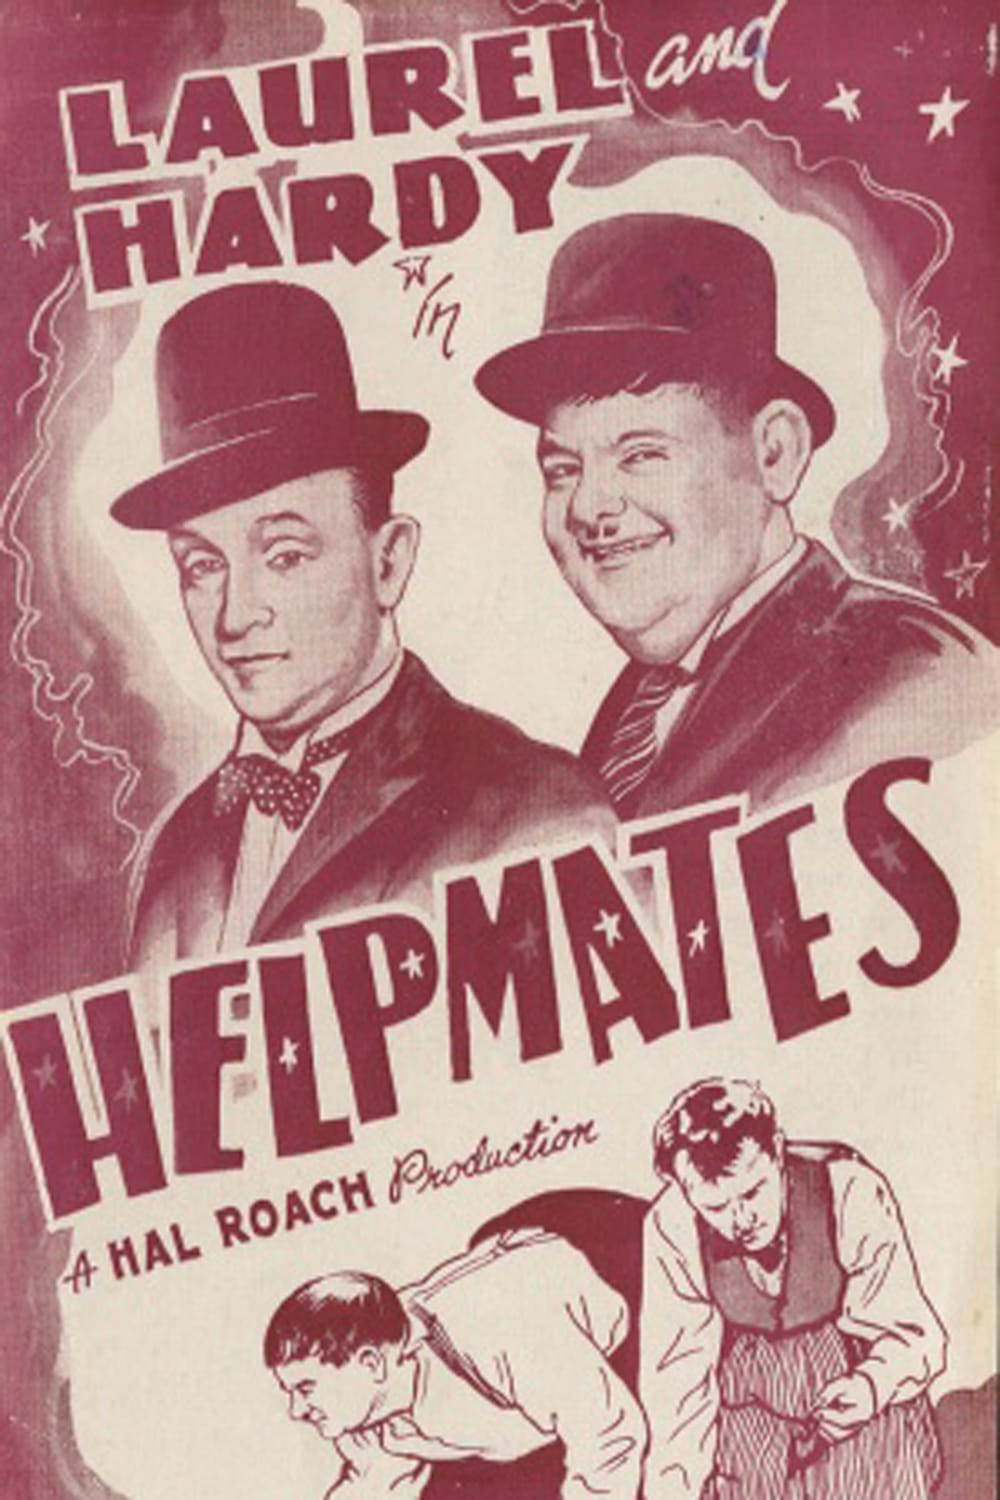 Poster for the movie "Helpmates"